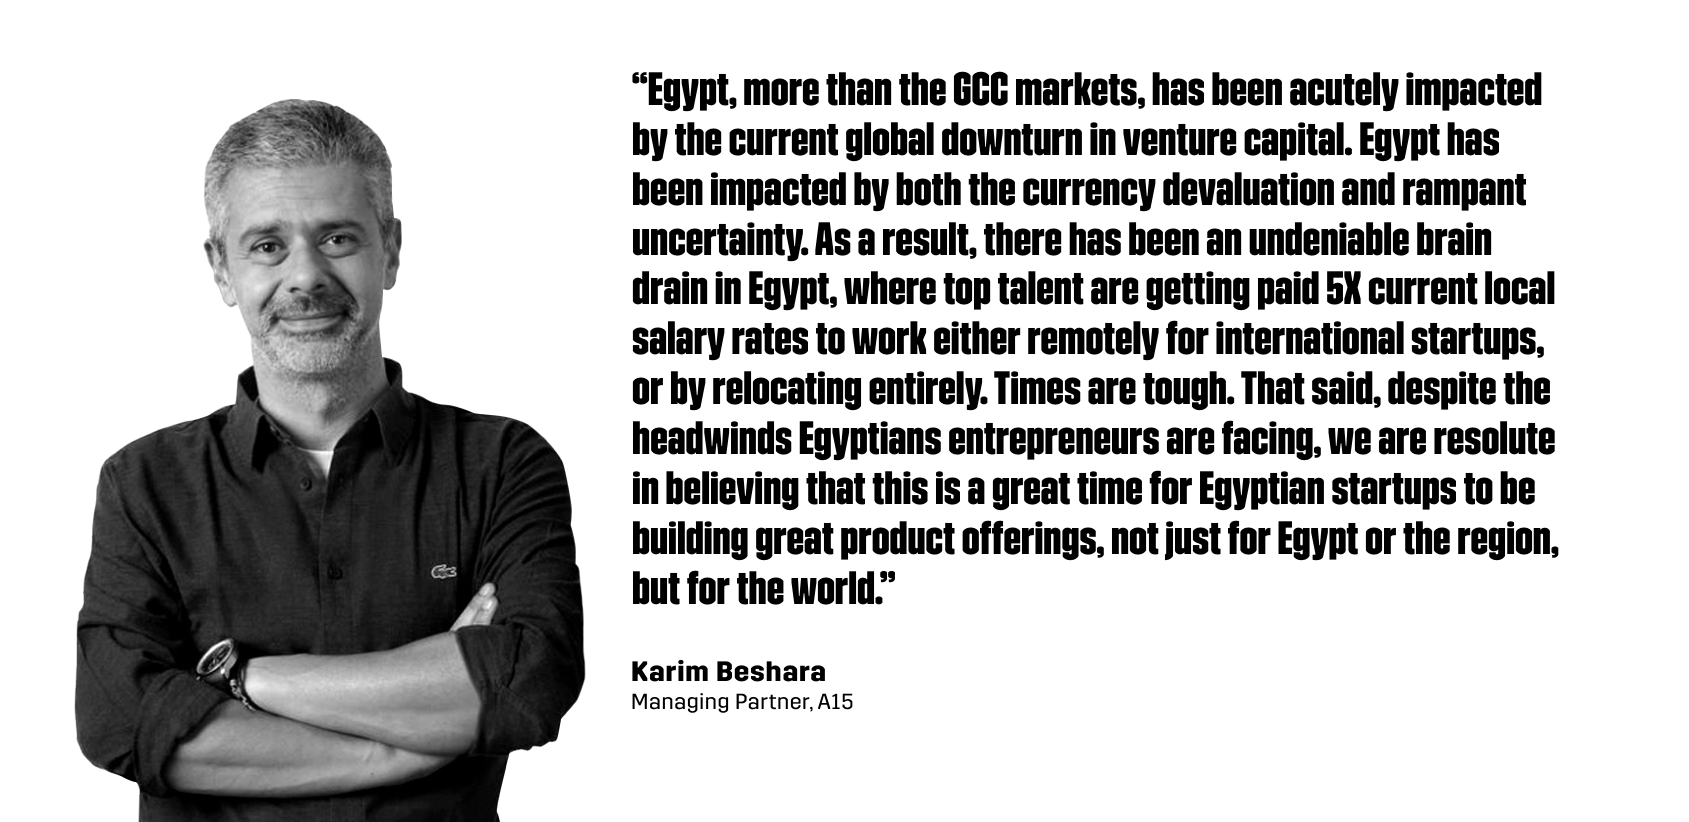 “Egypt, more than the GCC markets, has been acutely impacted by the current global downturn in venture capital. Egypt has been impacted by both the currency devaluation and rampant uncertainty. As a result, there has been an undeniable brain drain in Egypt, where top talent are getting paid 5X current local salary rates to work either remotely for international startups, or by relocating entirely. Times are tough. That said, despite the headwinds Egyptians entrepreneurs are facing, we are resolute in believing that this is a great time for Egyptian startups to be building great product offerings, not just for Egypt or the region, but for the world.” - Karim Beshara, Managing Partner of A15